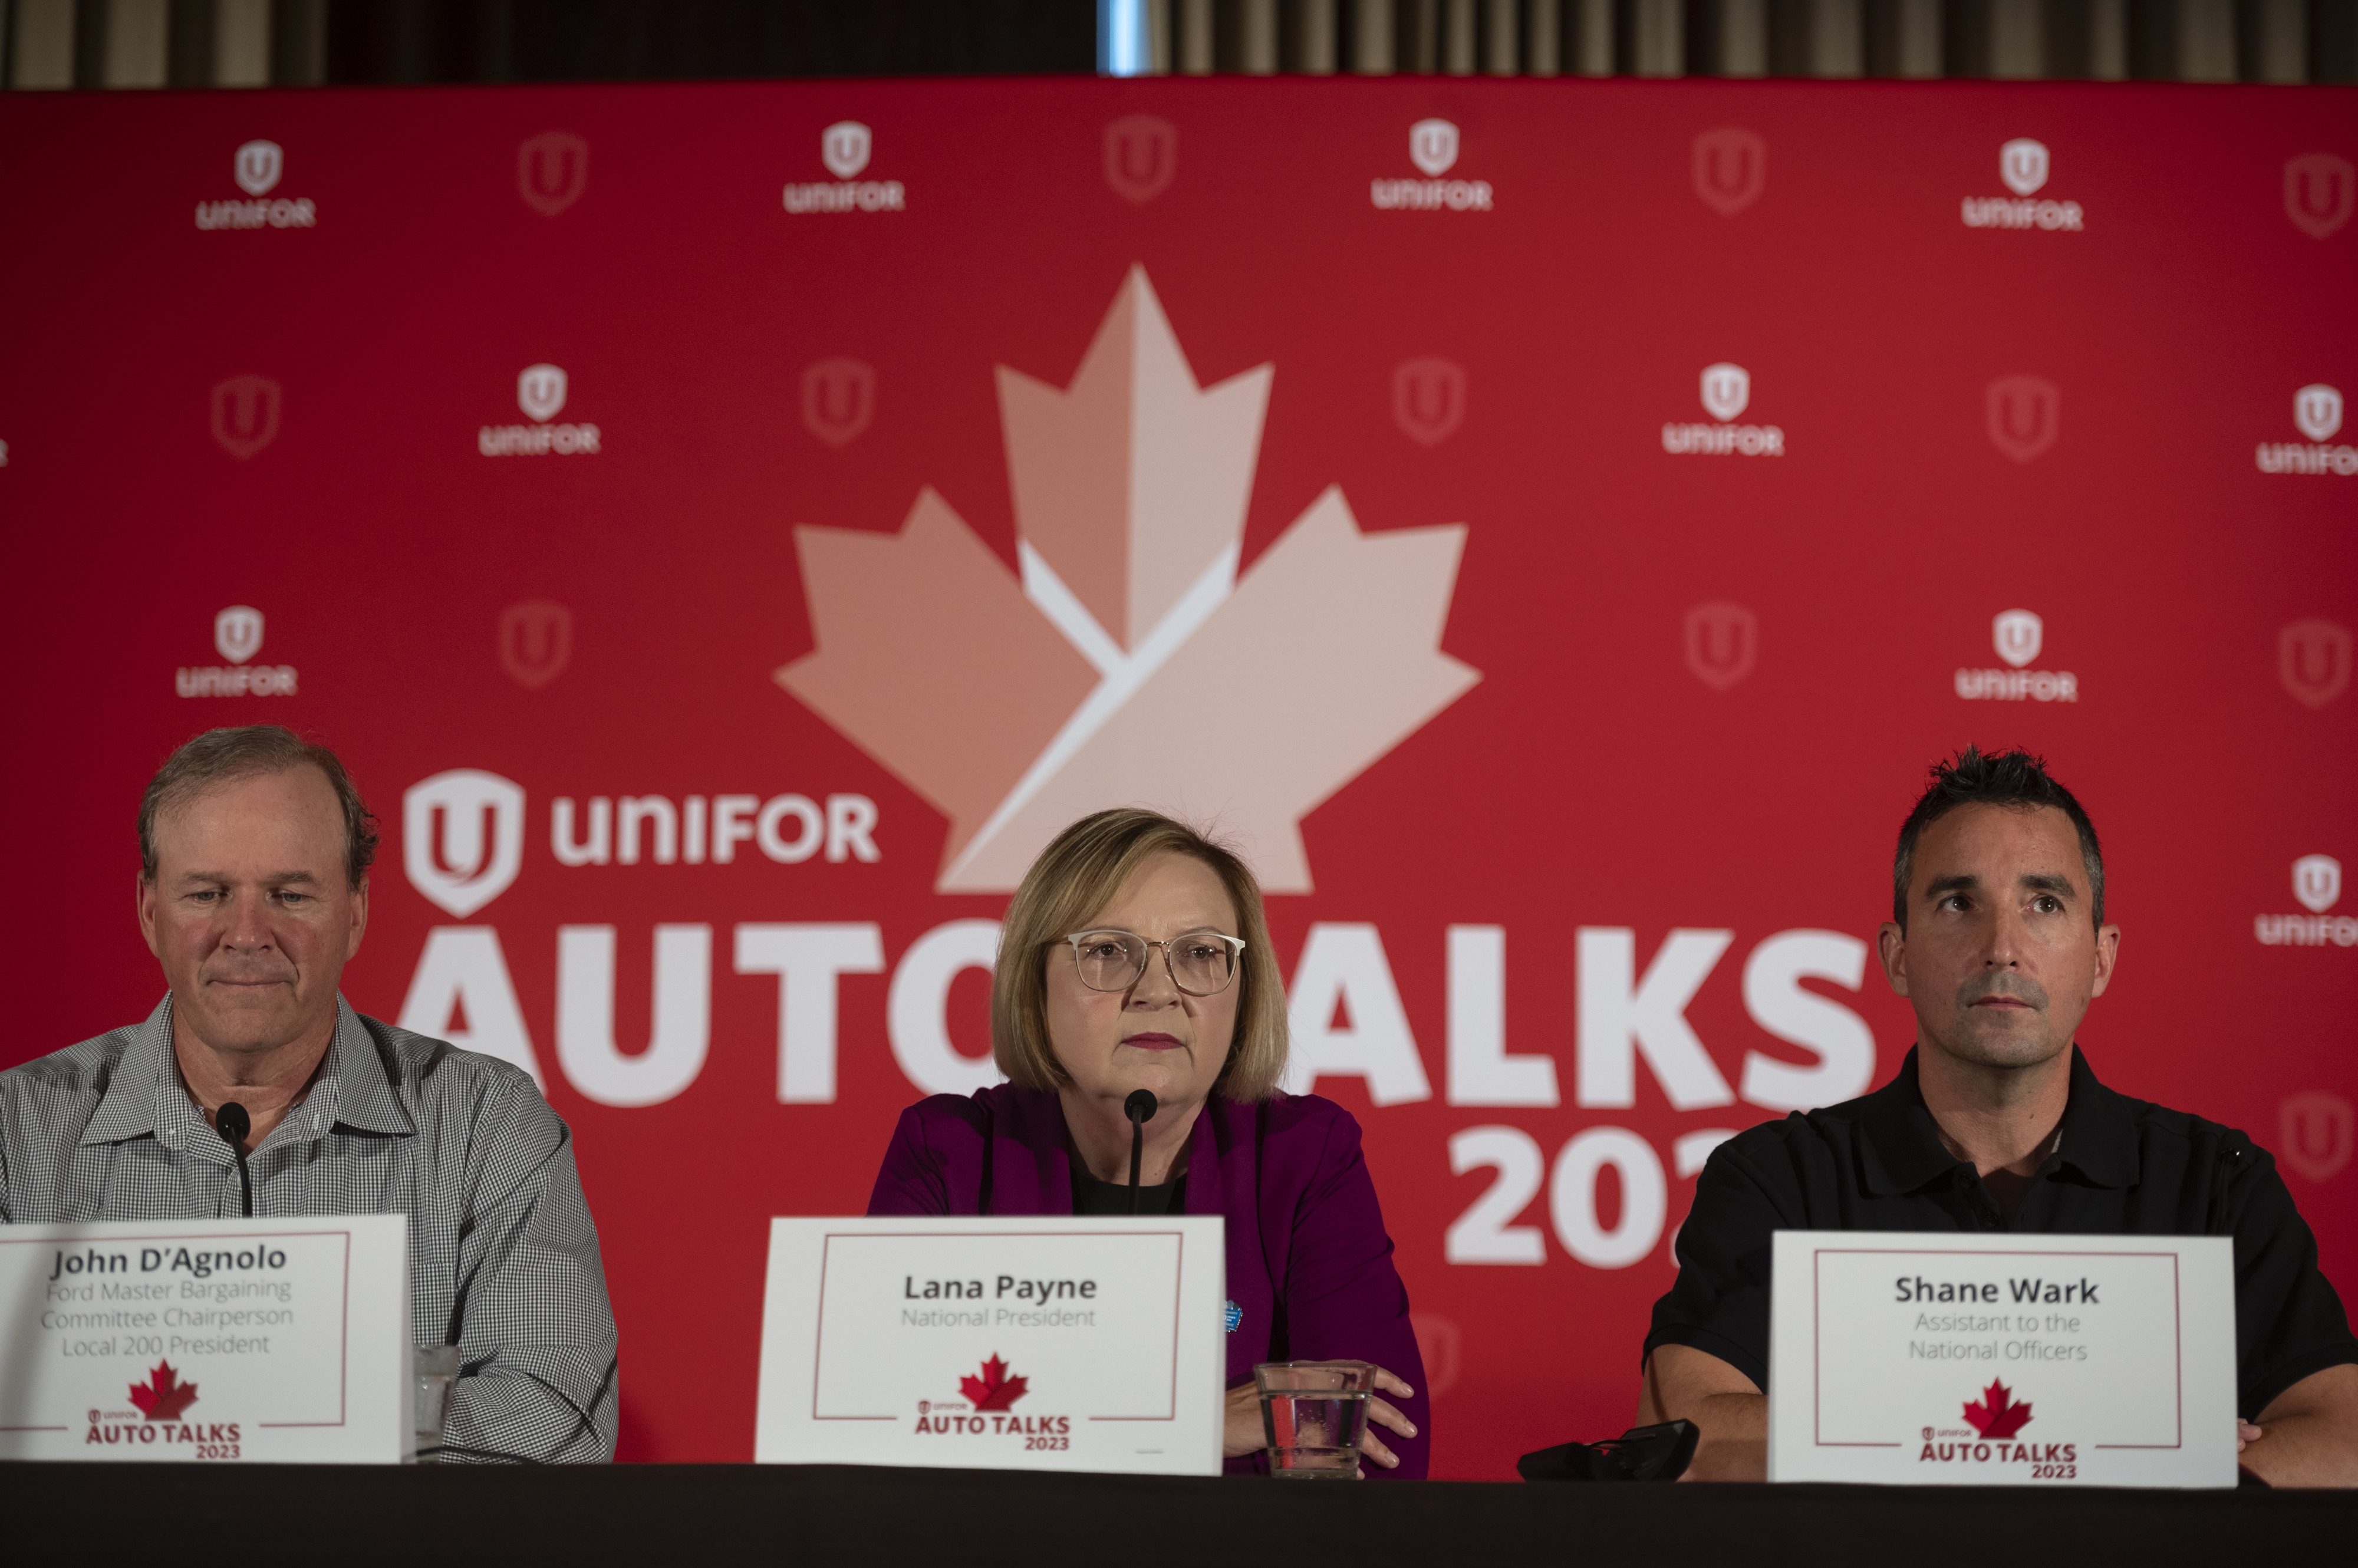 Unifor auto workers’ contract with Ford set to expire as U.S. strikes continue